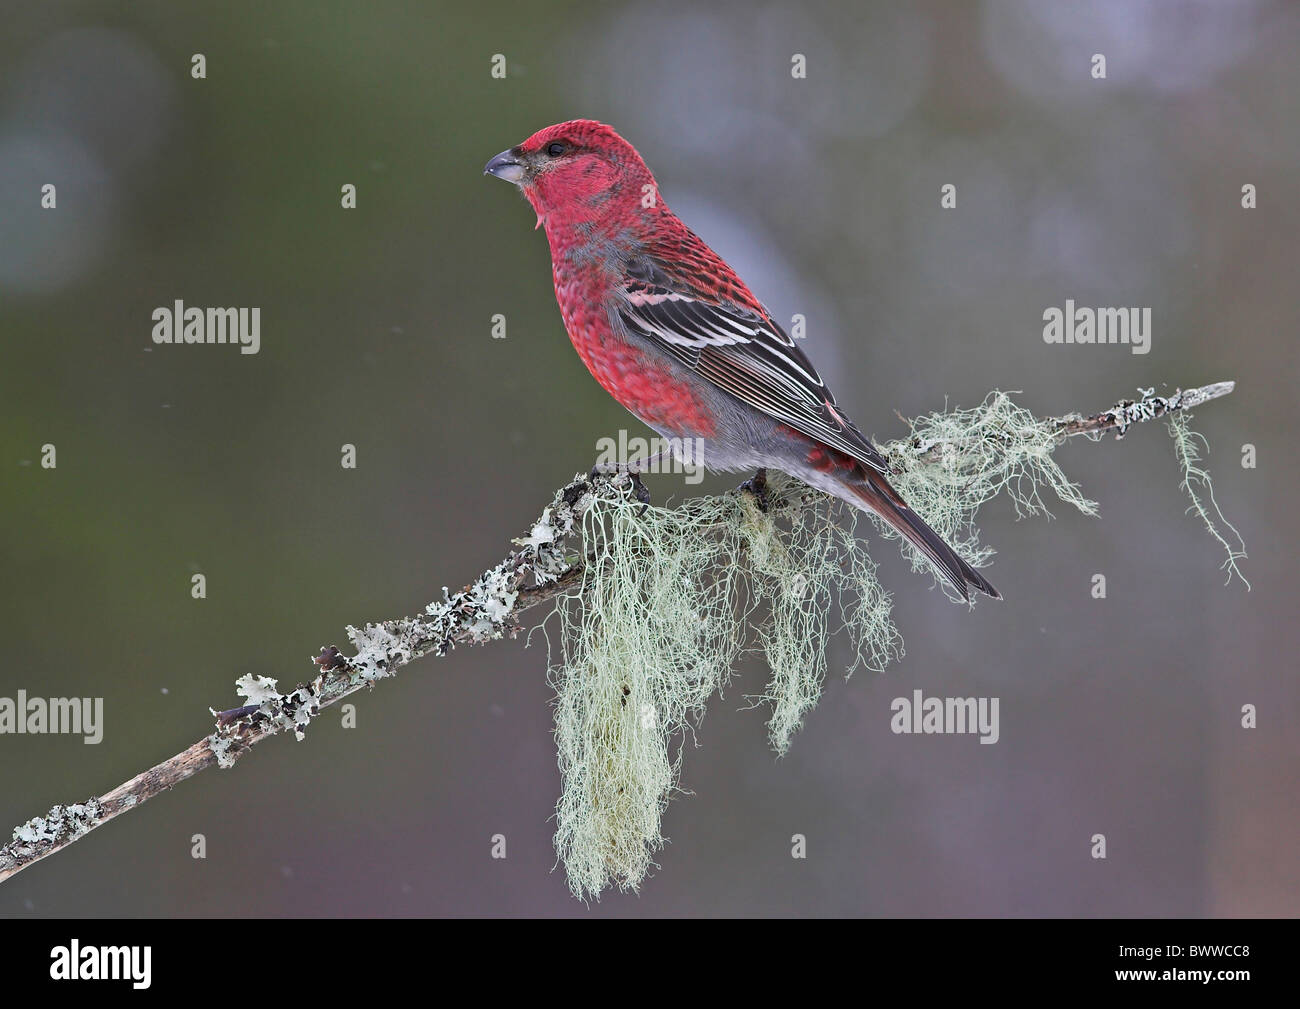 Pine Grosbeak (Pinicola enucleator) adult male, perched on lichen covered twig, Lapland, Finland Stock Photo